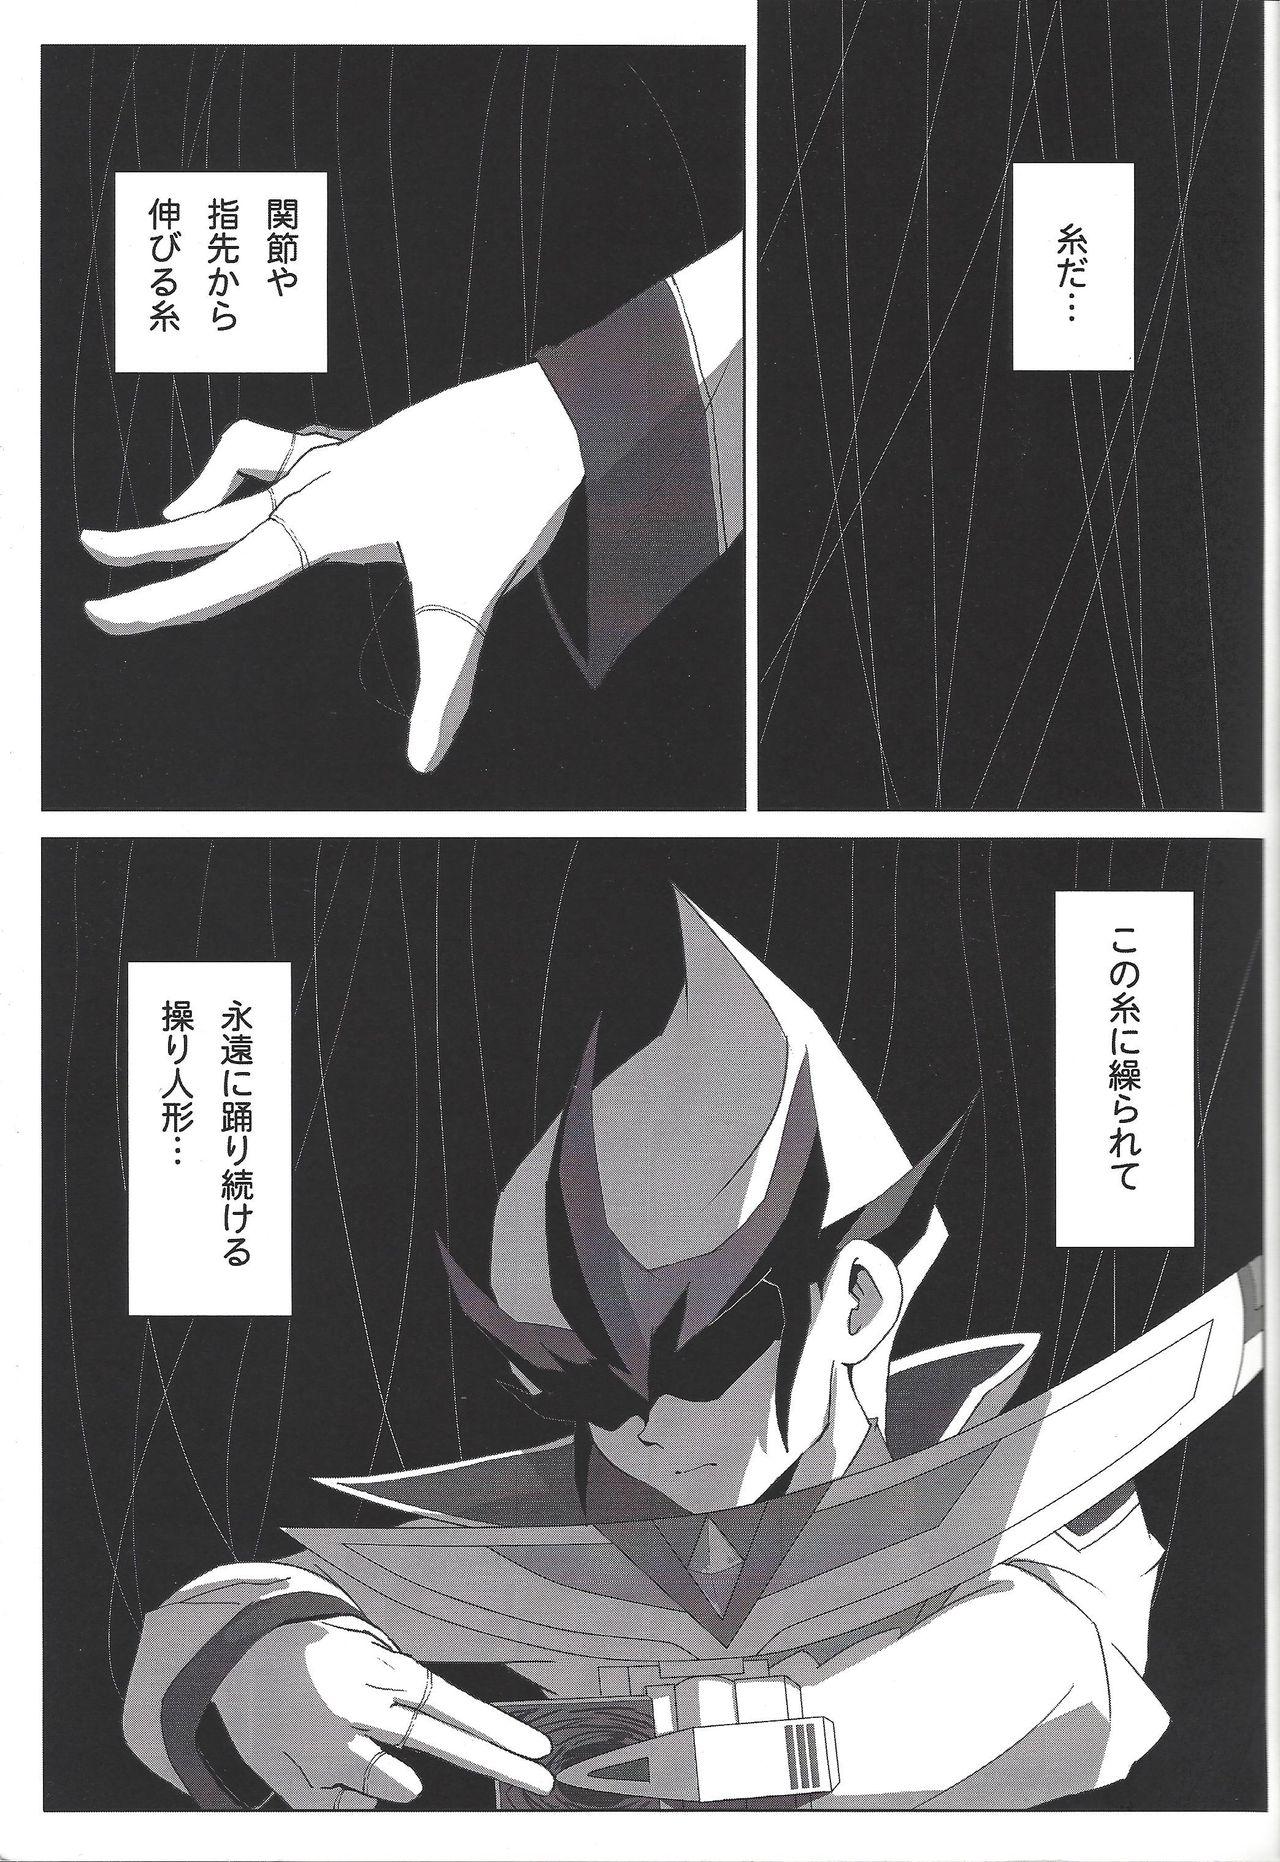 Spit thREAd - Yu-gi-oh zexal Gay Outdoors - Page 4